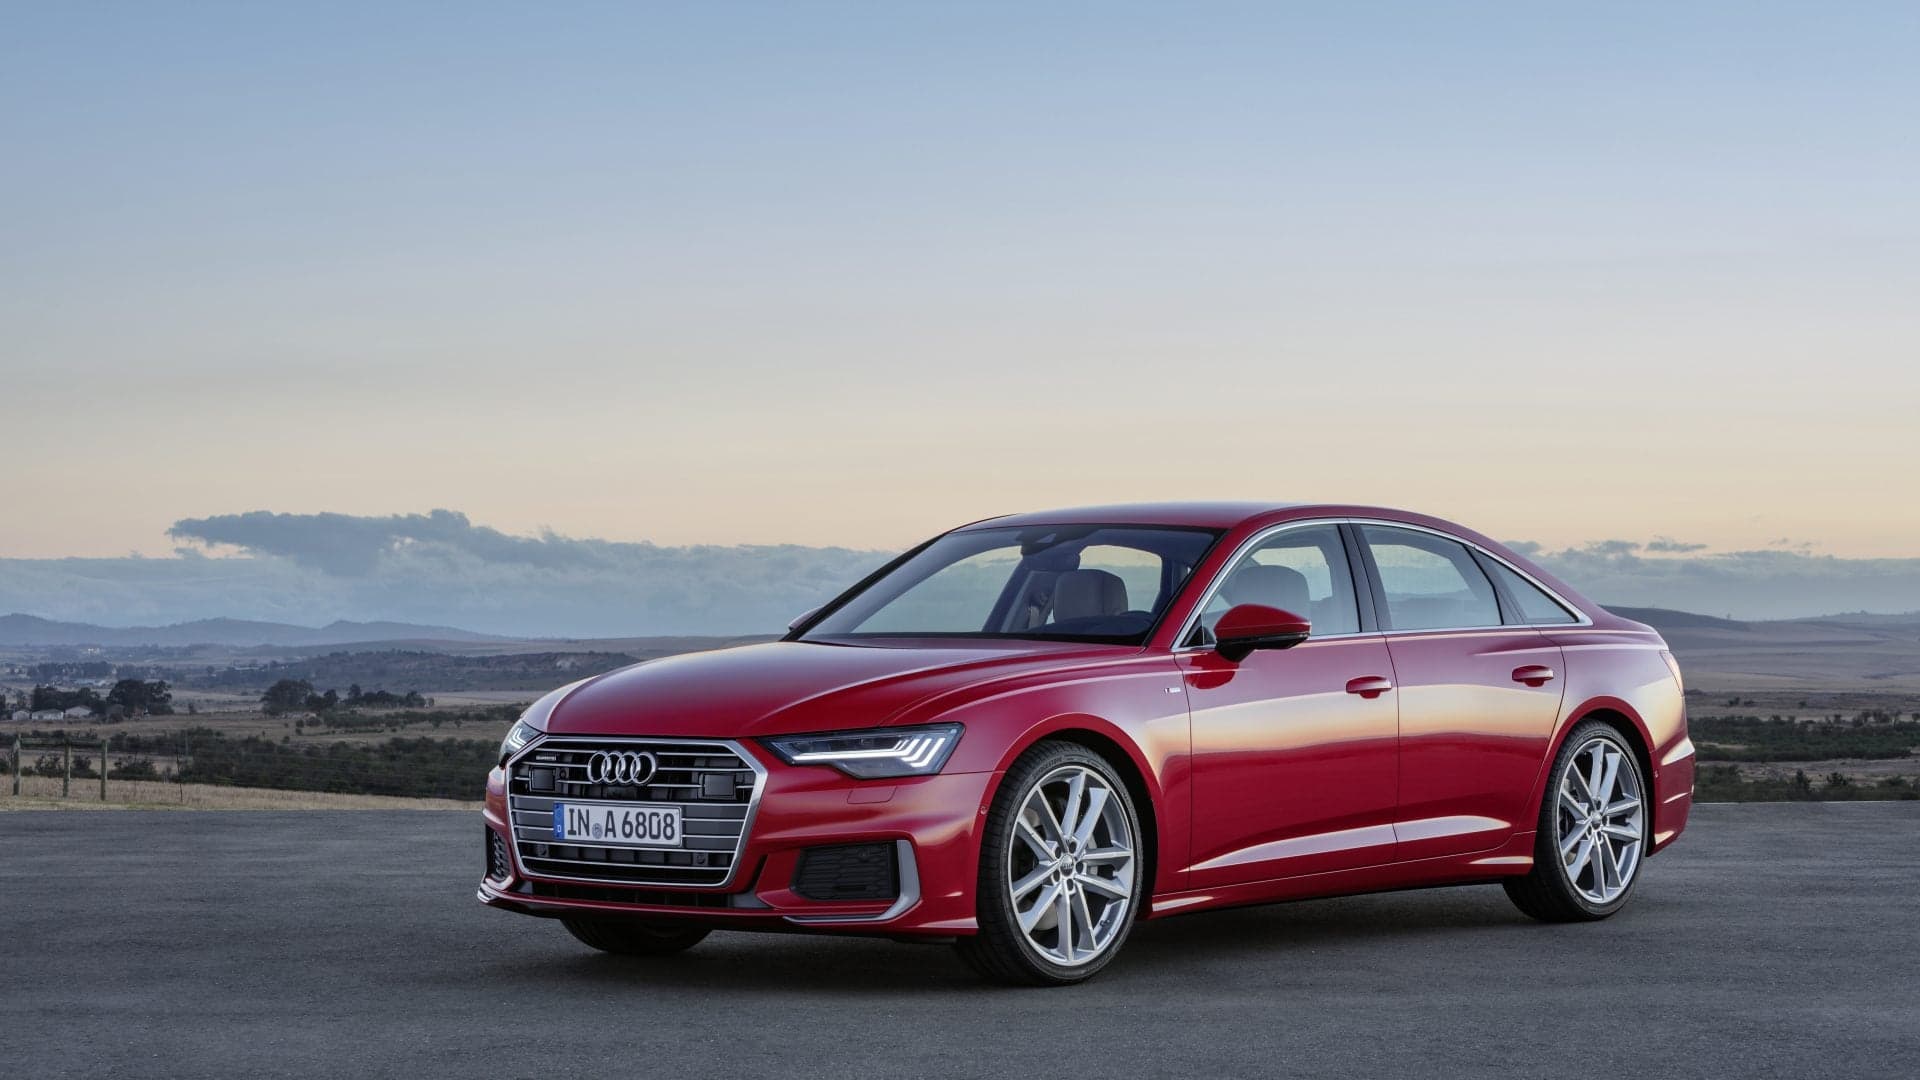 This Is the 2019 Audi A6: An Audi Sedan by the Numbers